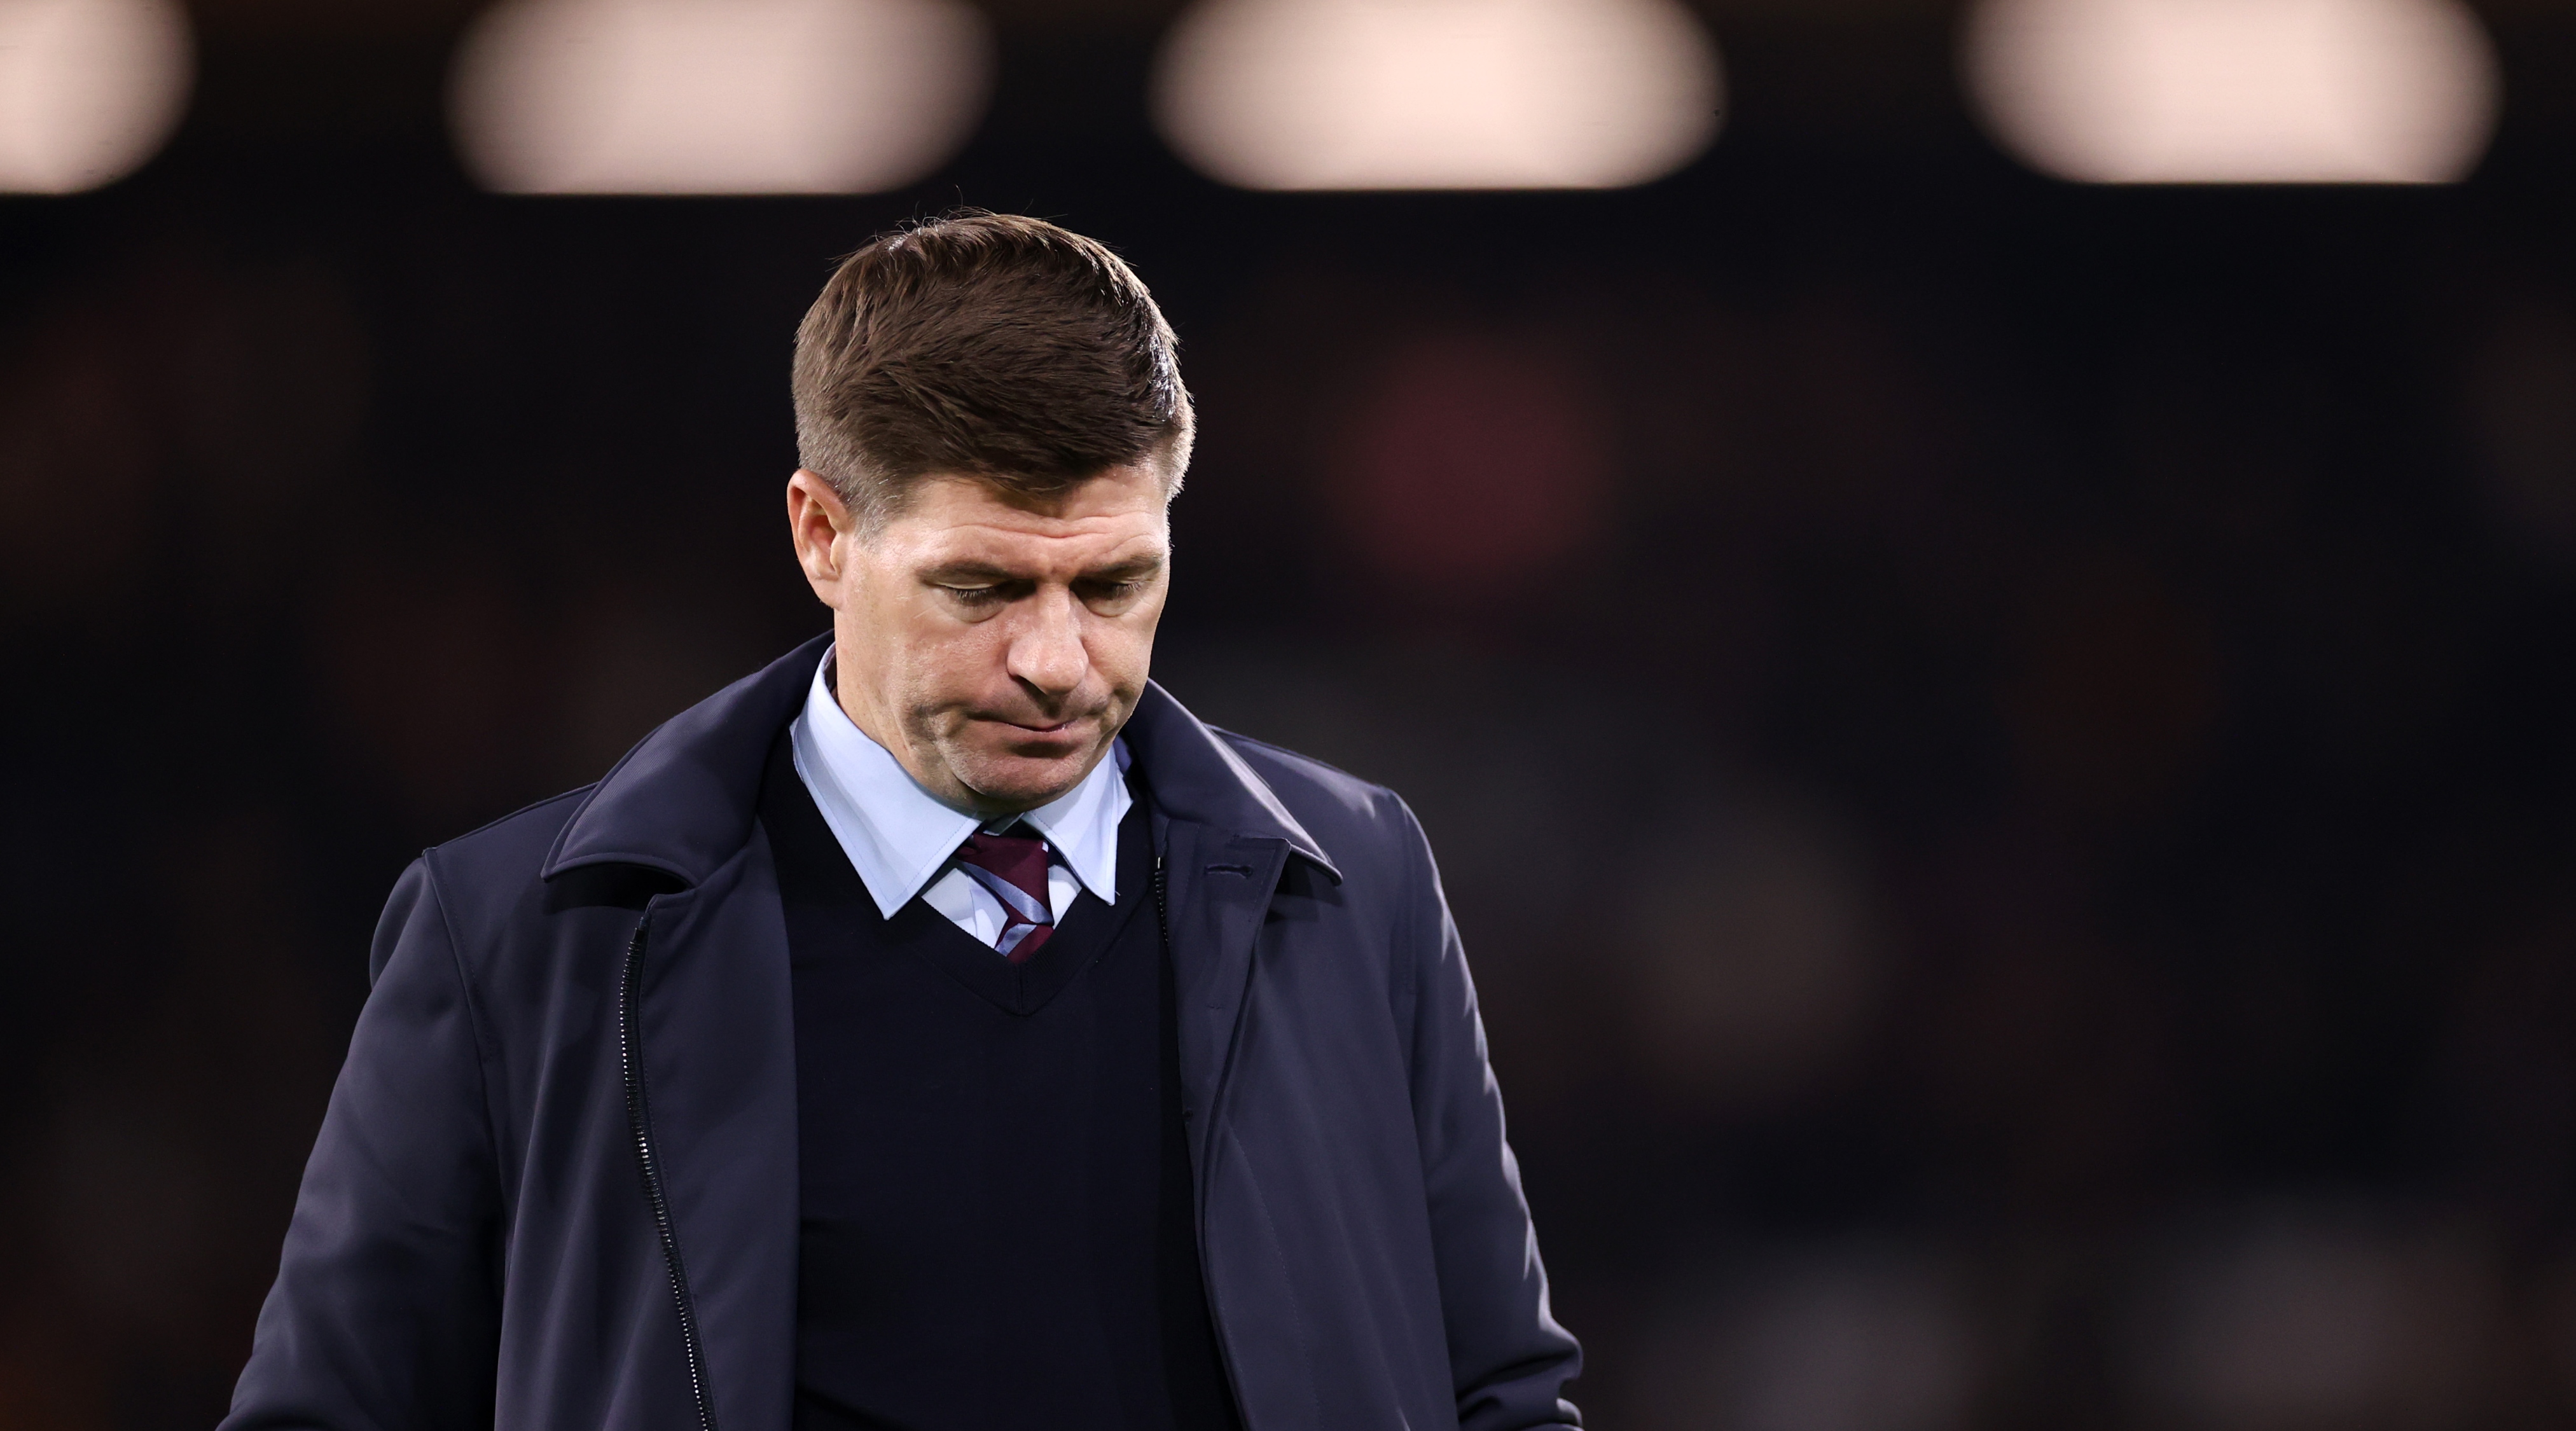 Steven Gerrard, then head coach of Aston Villa, looks dejected after the Premier League match between Fulham and Aston Villa on October 20, 2022 in Craven Cottage, London, United Kingdom